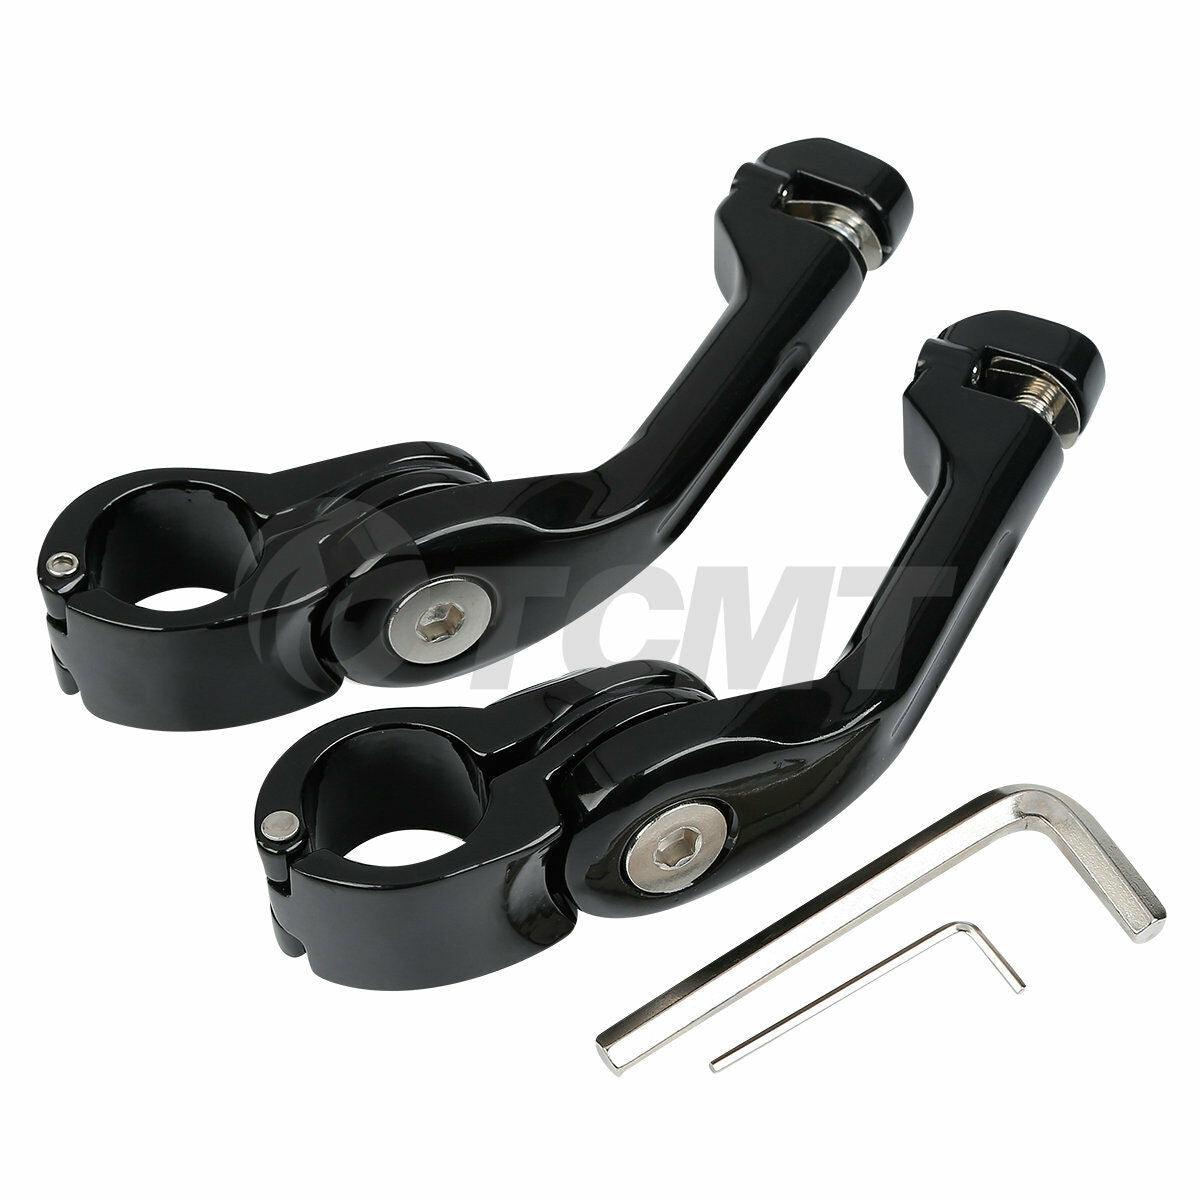 1-1/4" Black Highway Engine Guard Long Angled Foot Pegs Mount For Harley Touring - Moto Life Products